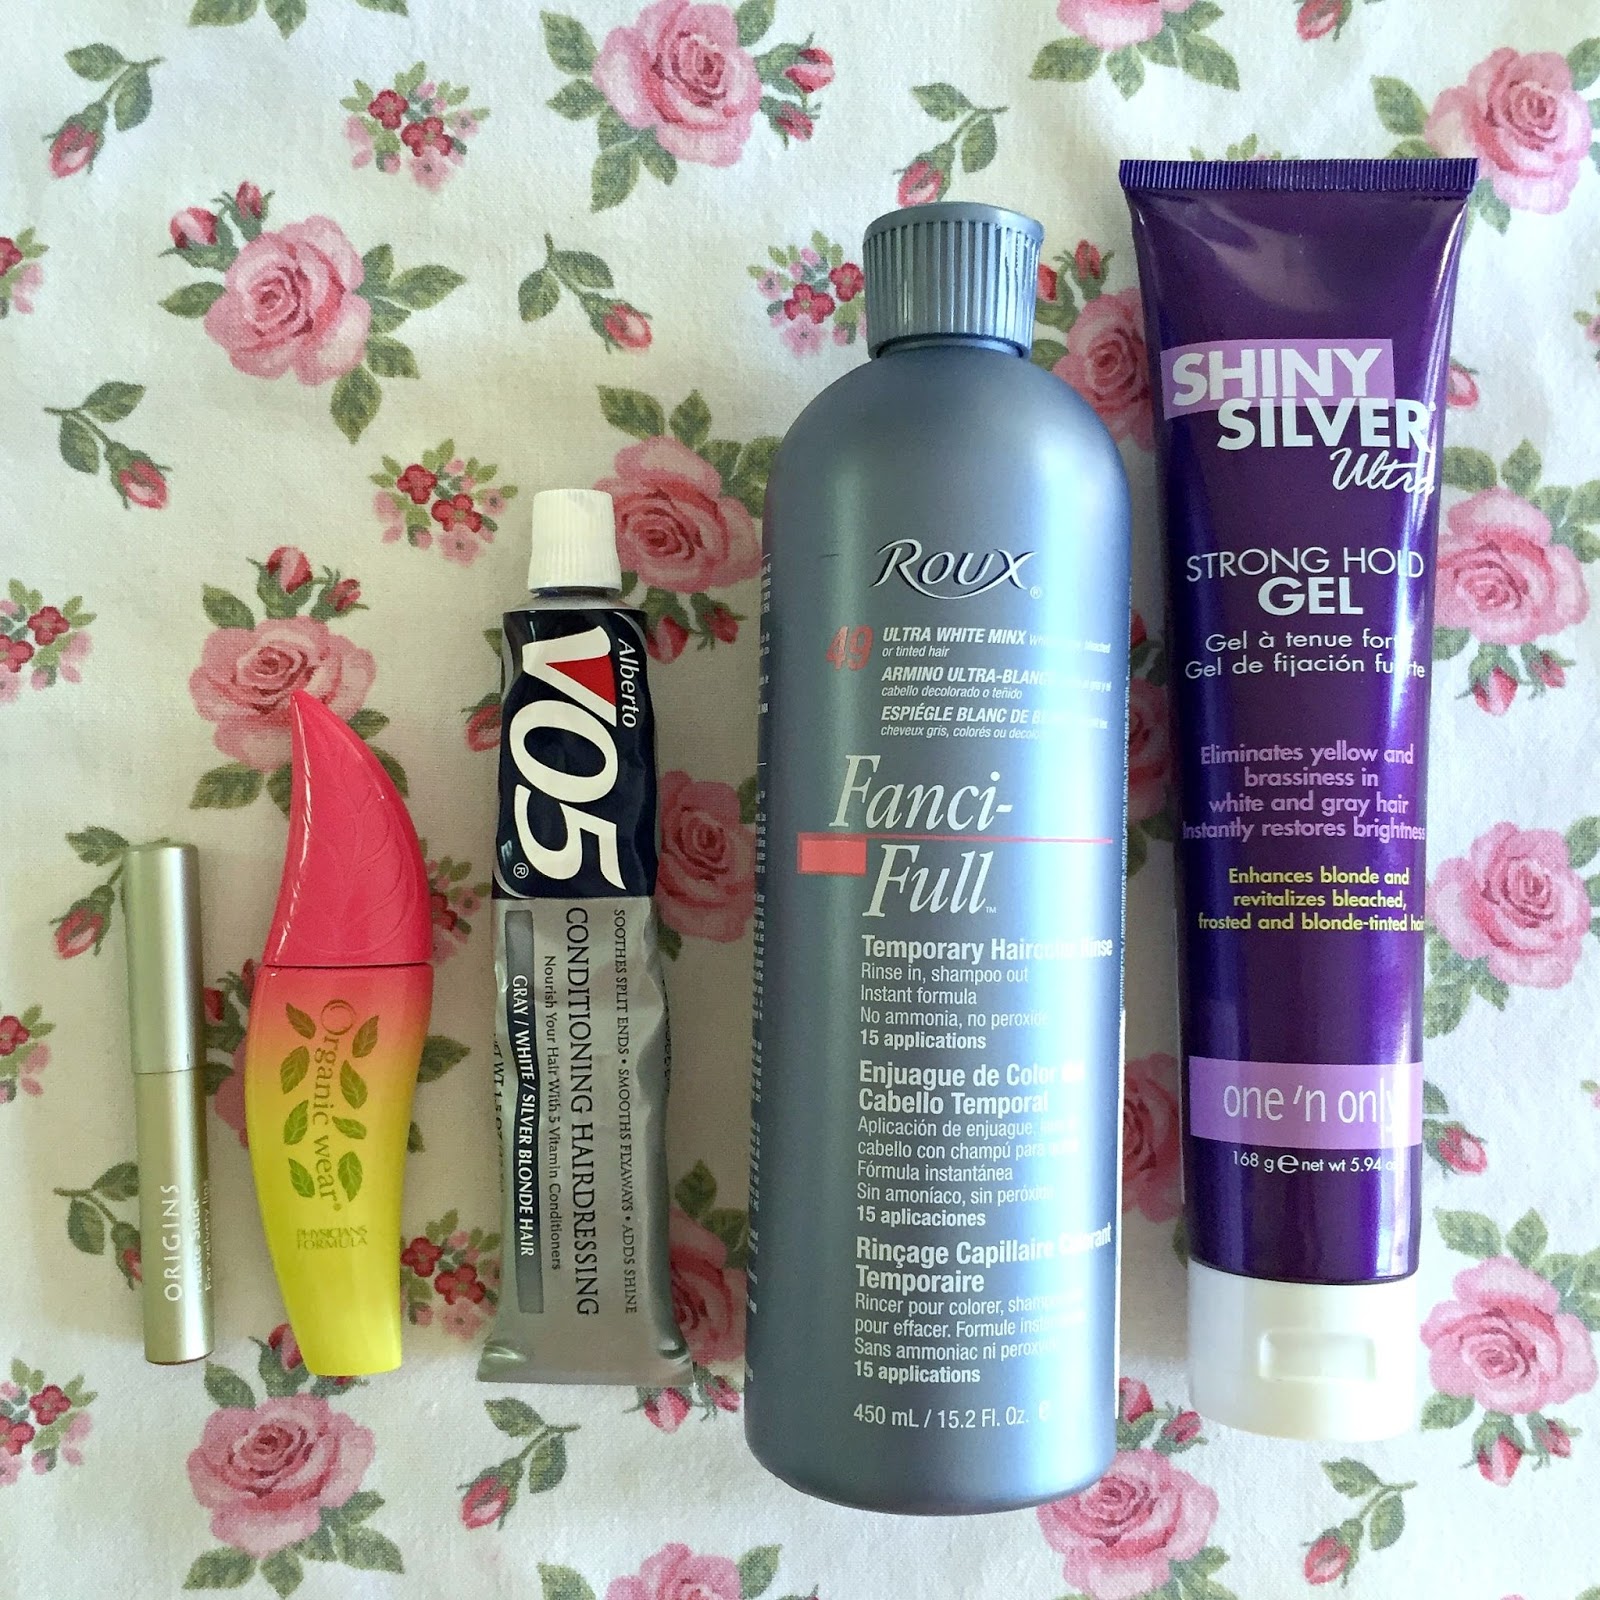 : Great Gray Hair Products and Makeup Round Up!